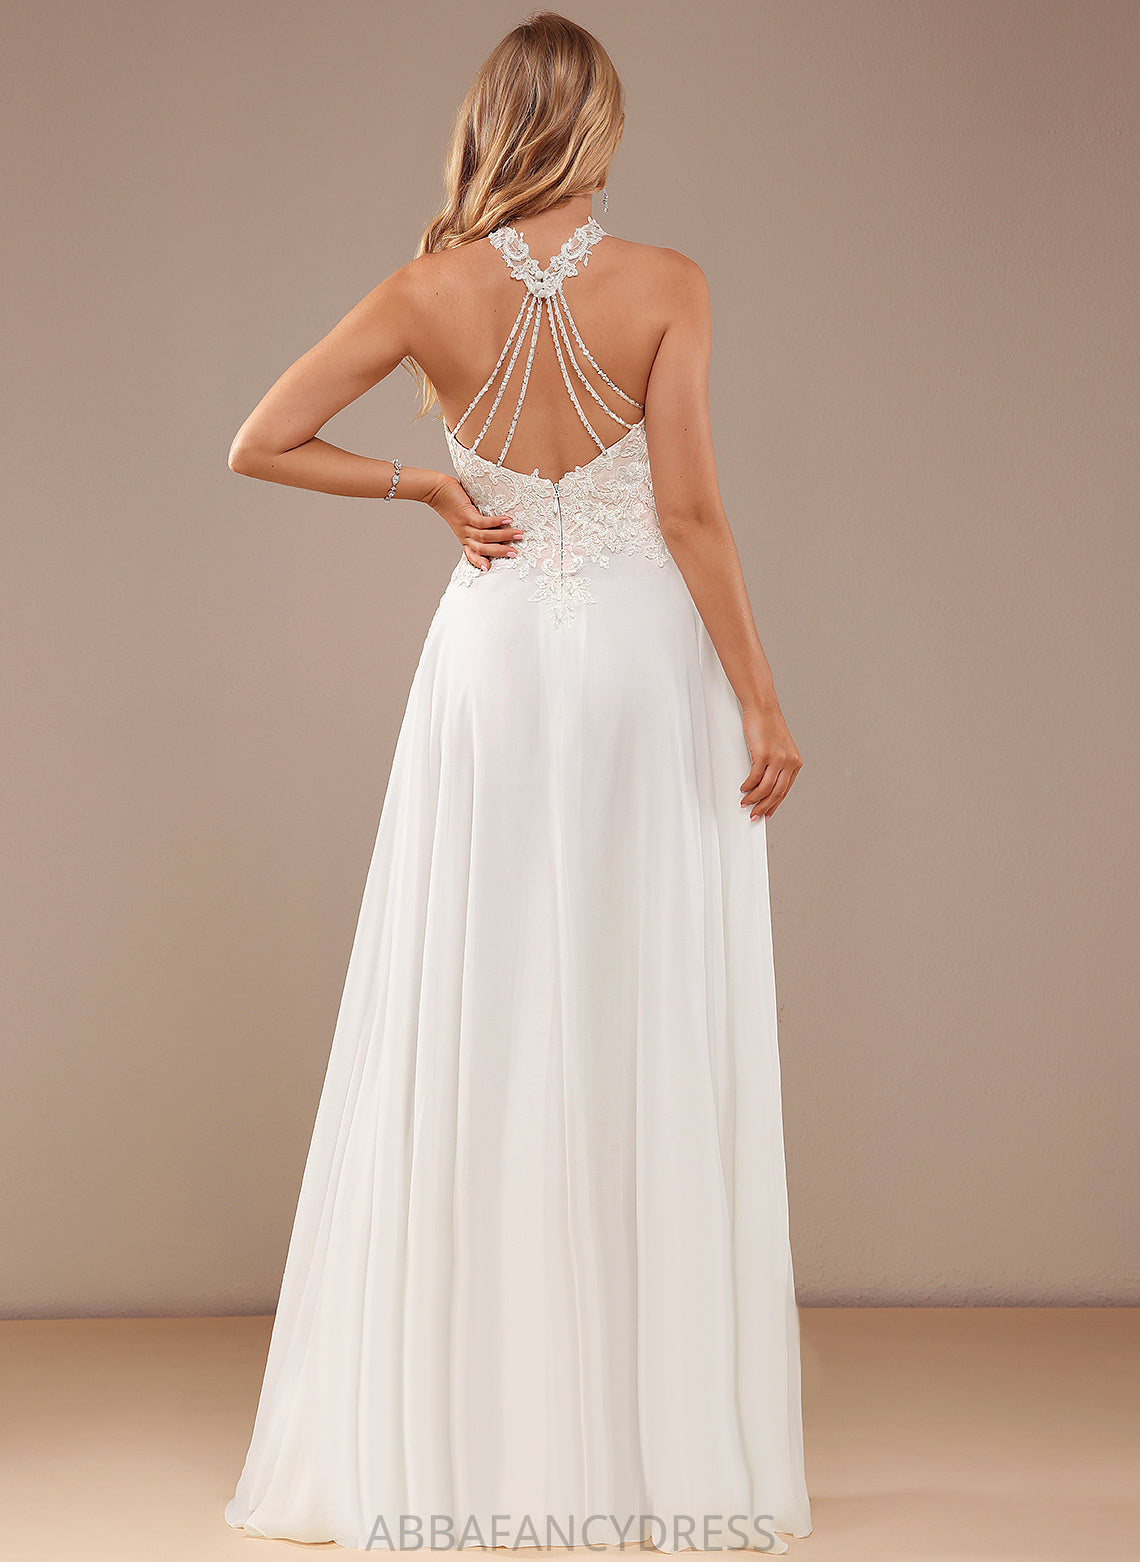 Wedding Dresses Floor-Length Wedding Chiffon High Neck Beading With Dress Sequins A-Line Lace Alisa